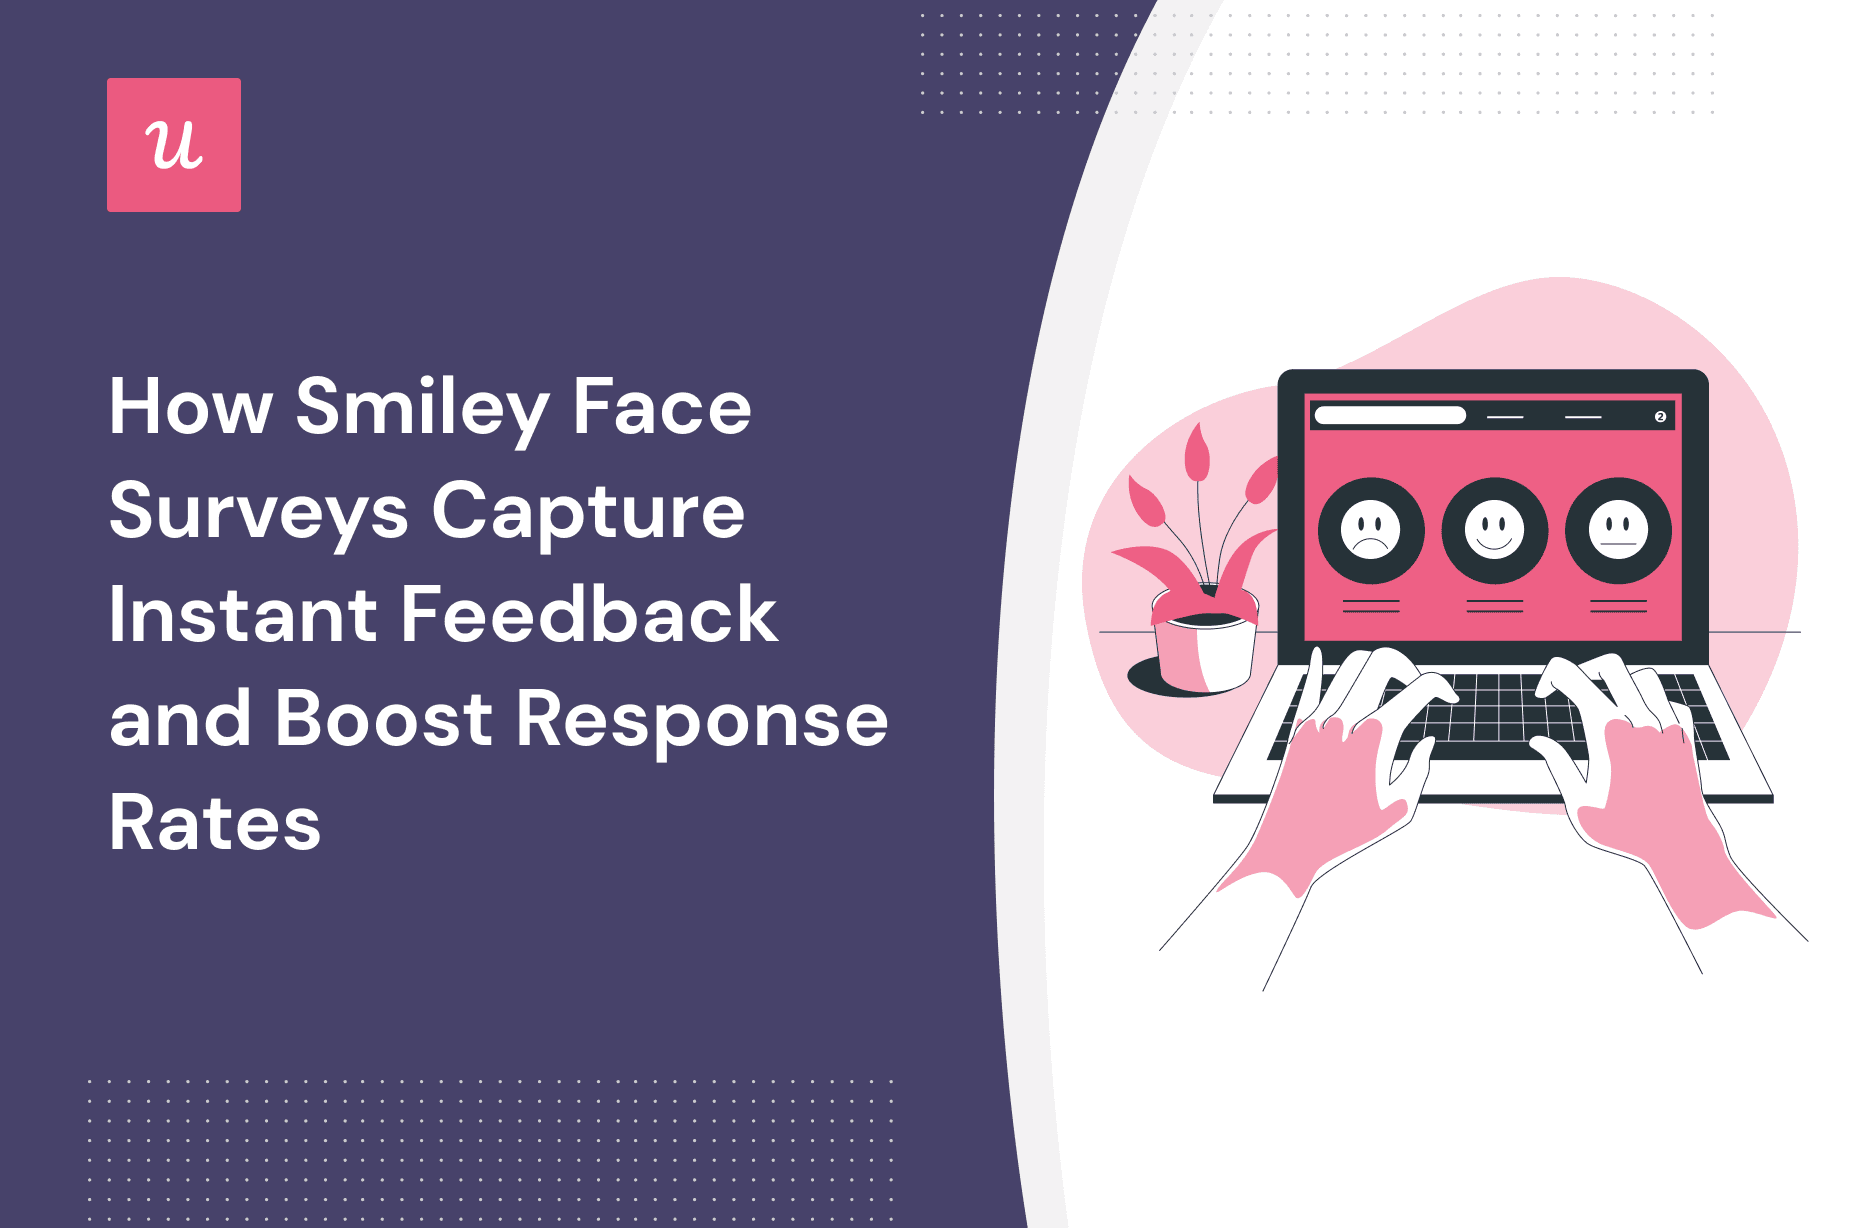 How Smiley Face Surveys Capture Instant Feedback and Boost Response Rates cover